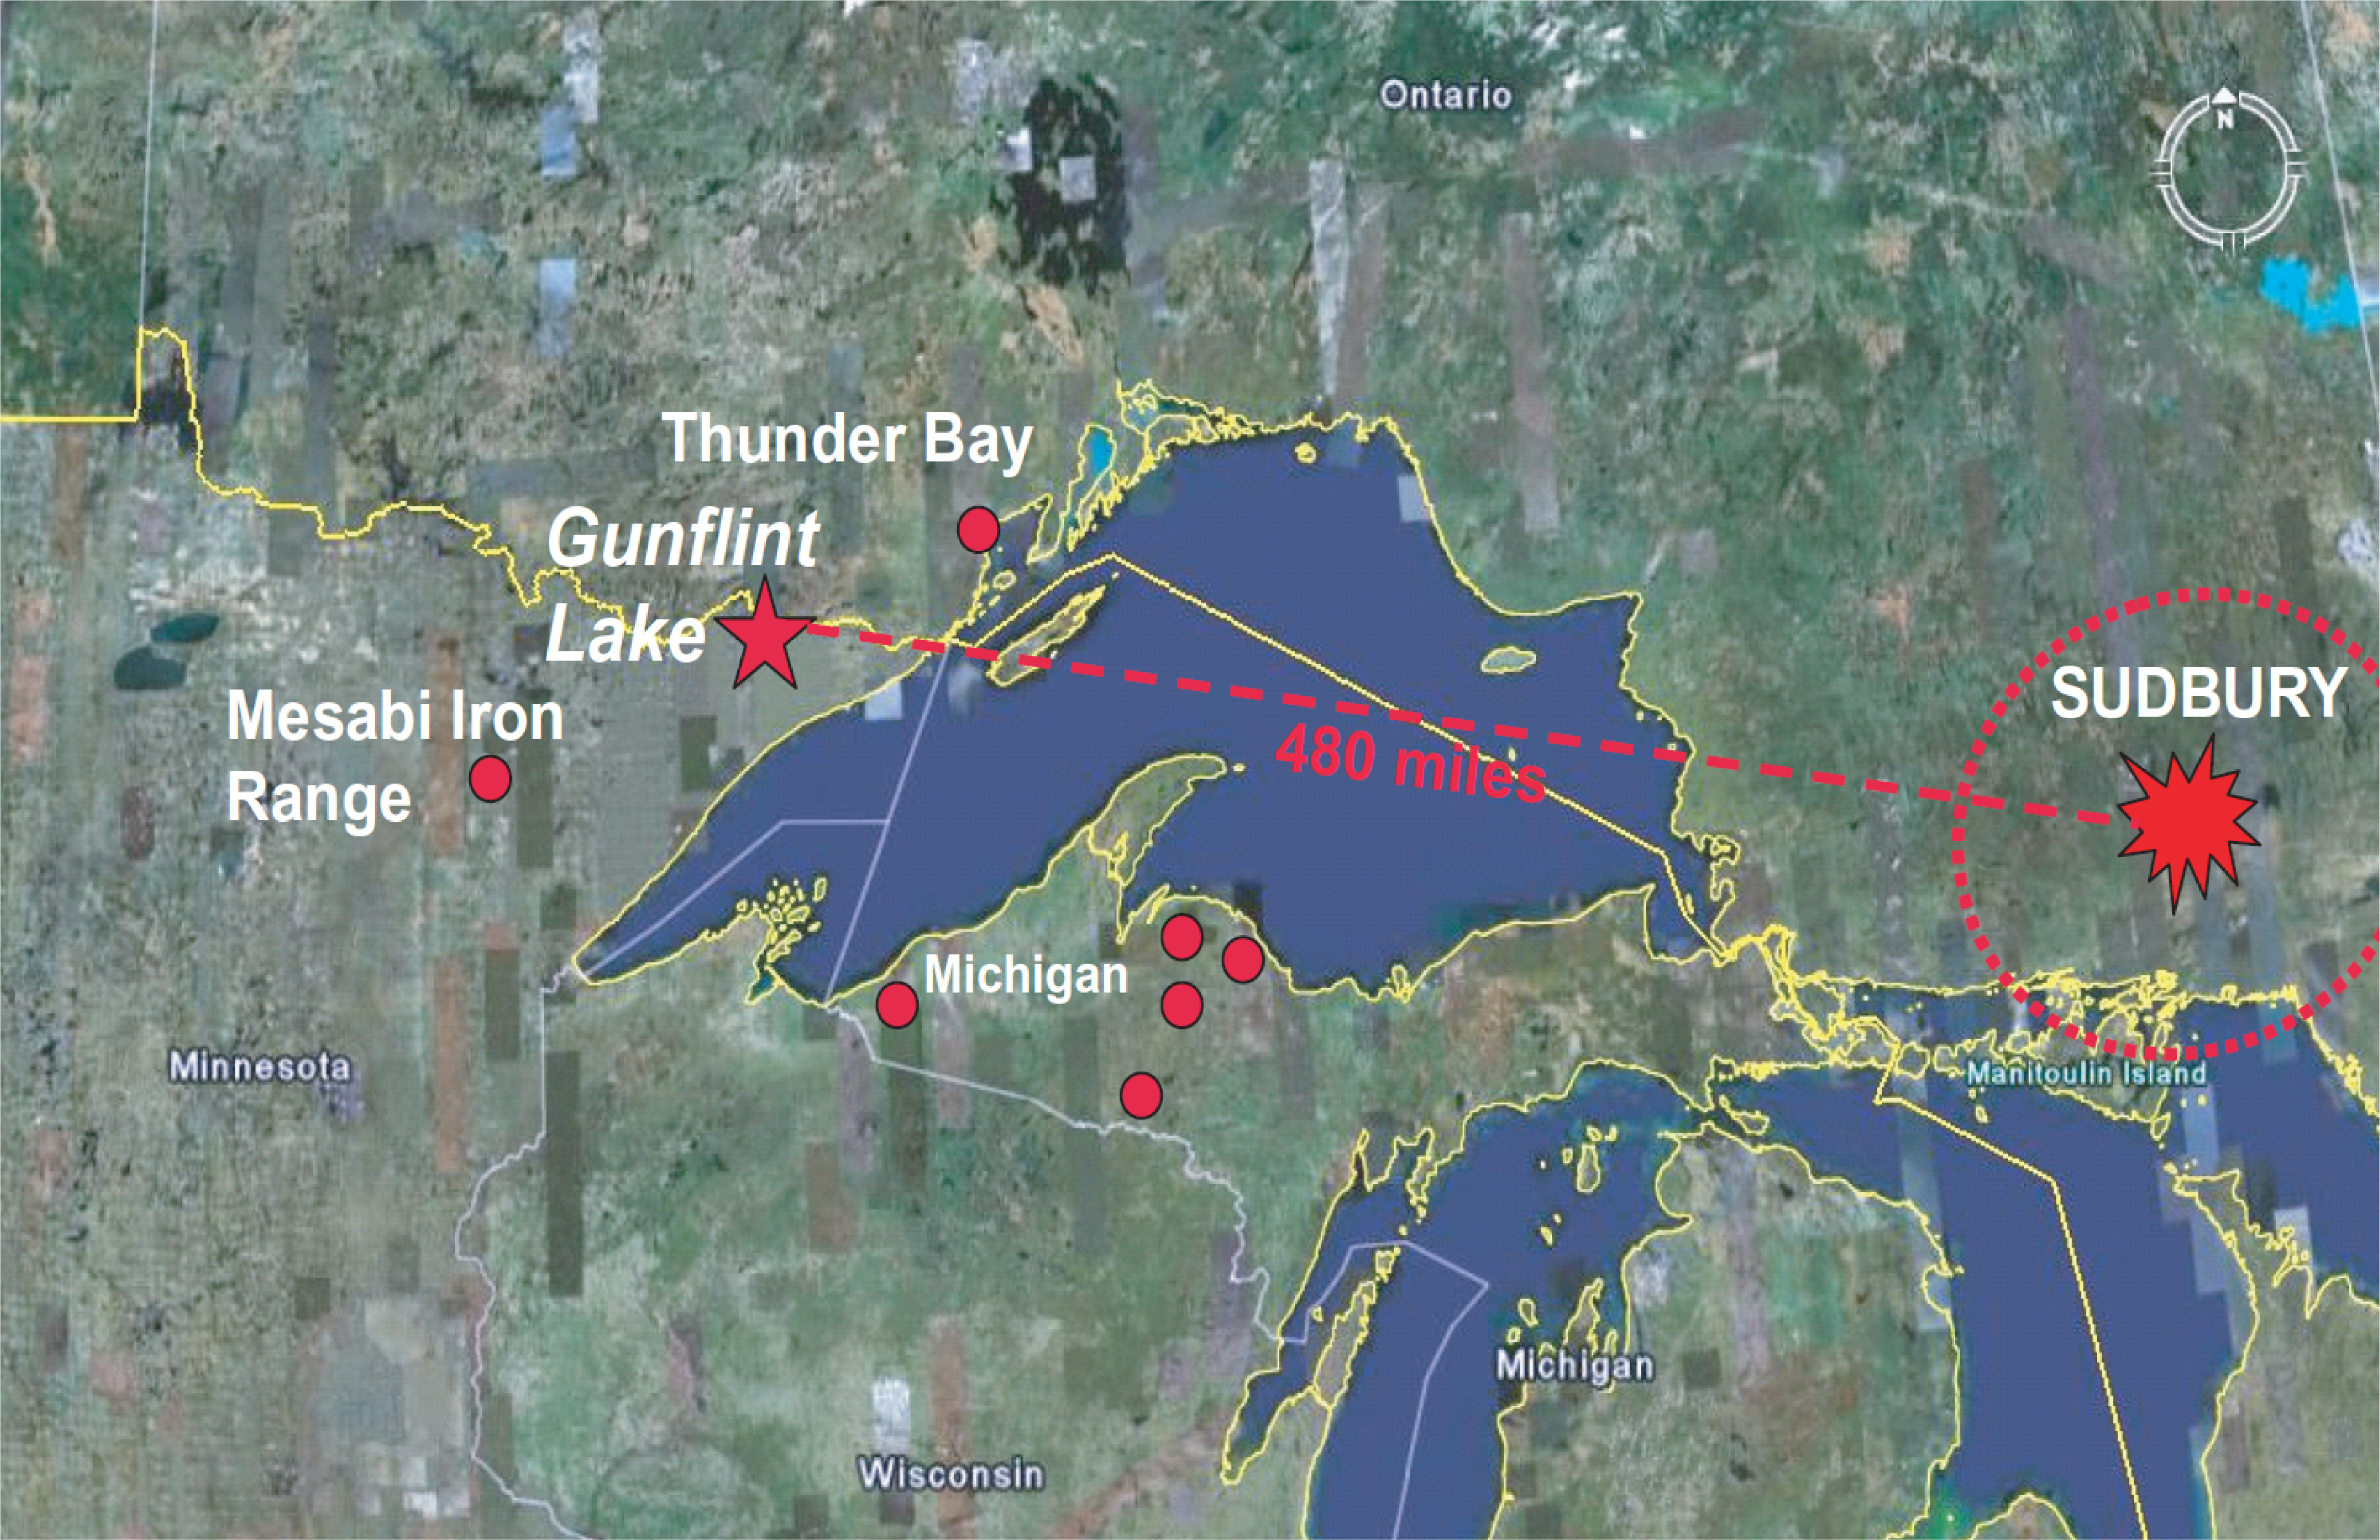 Sudbury impact site and ejecta localities in the Lake Superior region.